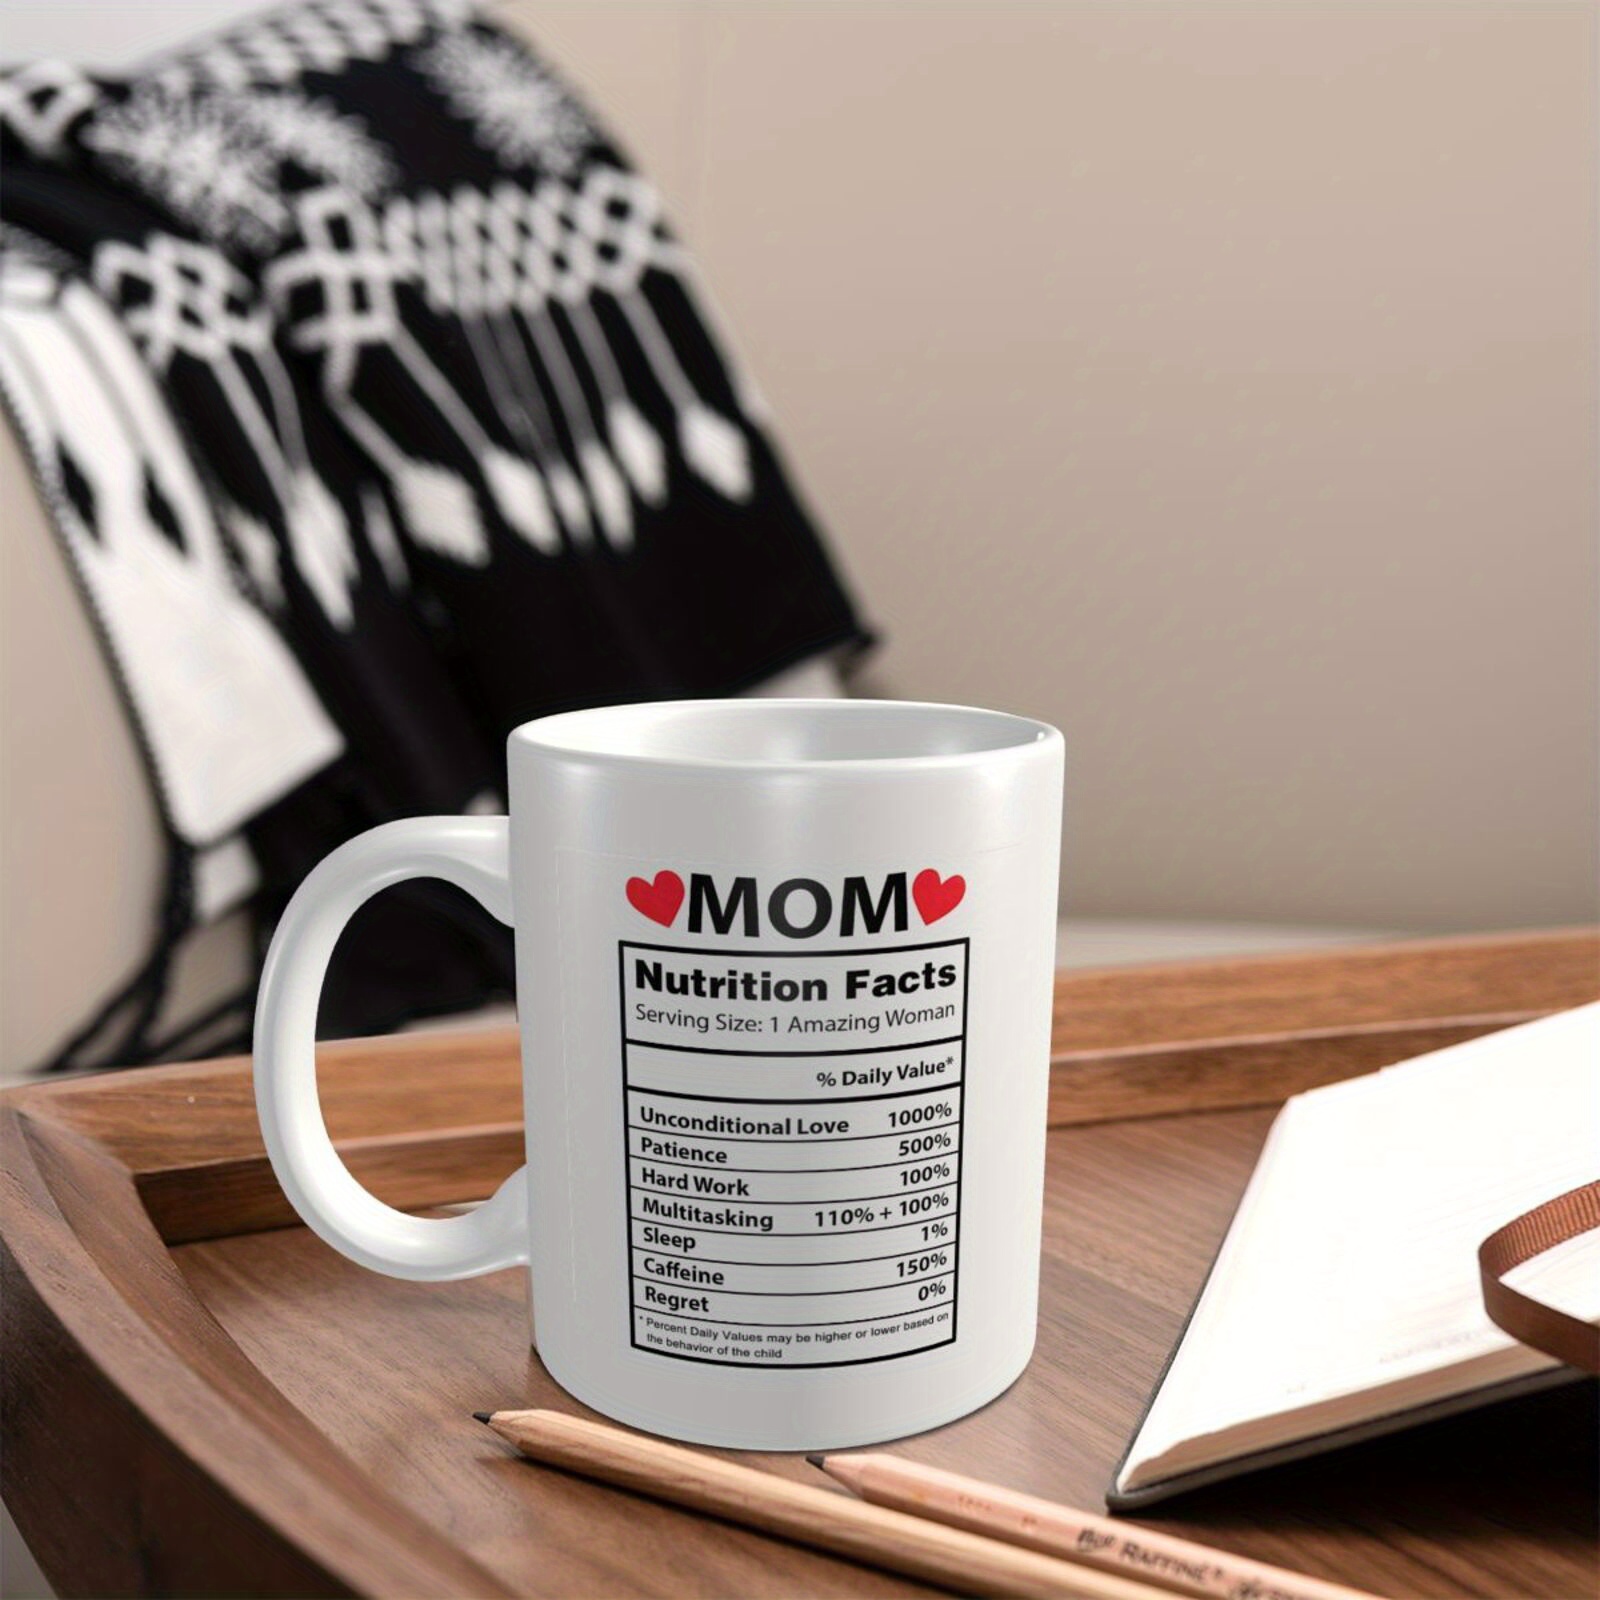 Cottage Creek Mom Gifts, Mom Christmas Gifts, 16oz. Ceramic I Love My Mom  Mug, Coffee Gifts for Mom, Mom Gifts from Daughters, Sons, Stocking  Stuffers for Adults - Yahoo Shopping